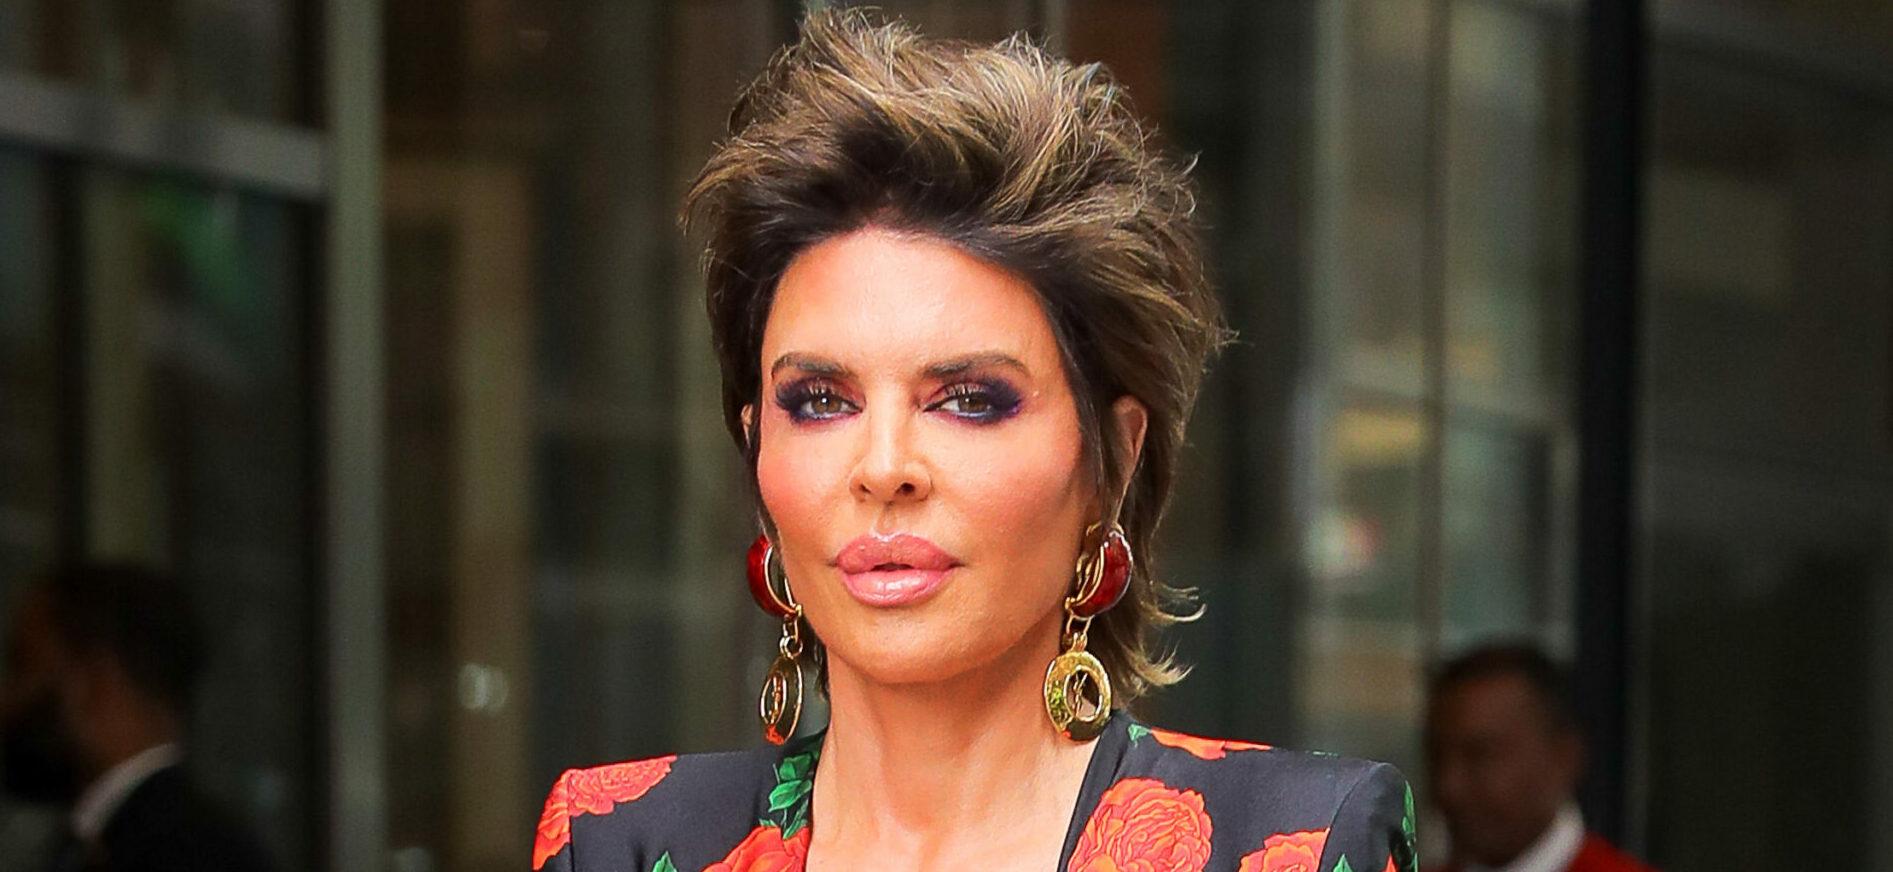 Lisa Rinna Has NO Plans To Hangout With ‘RHOBH’ Cast Members After Exit